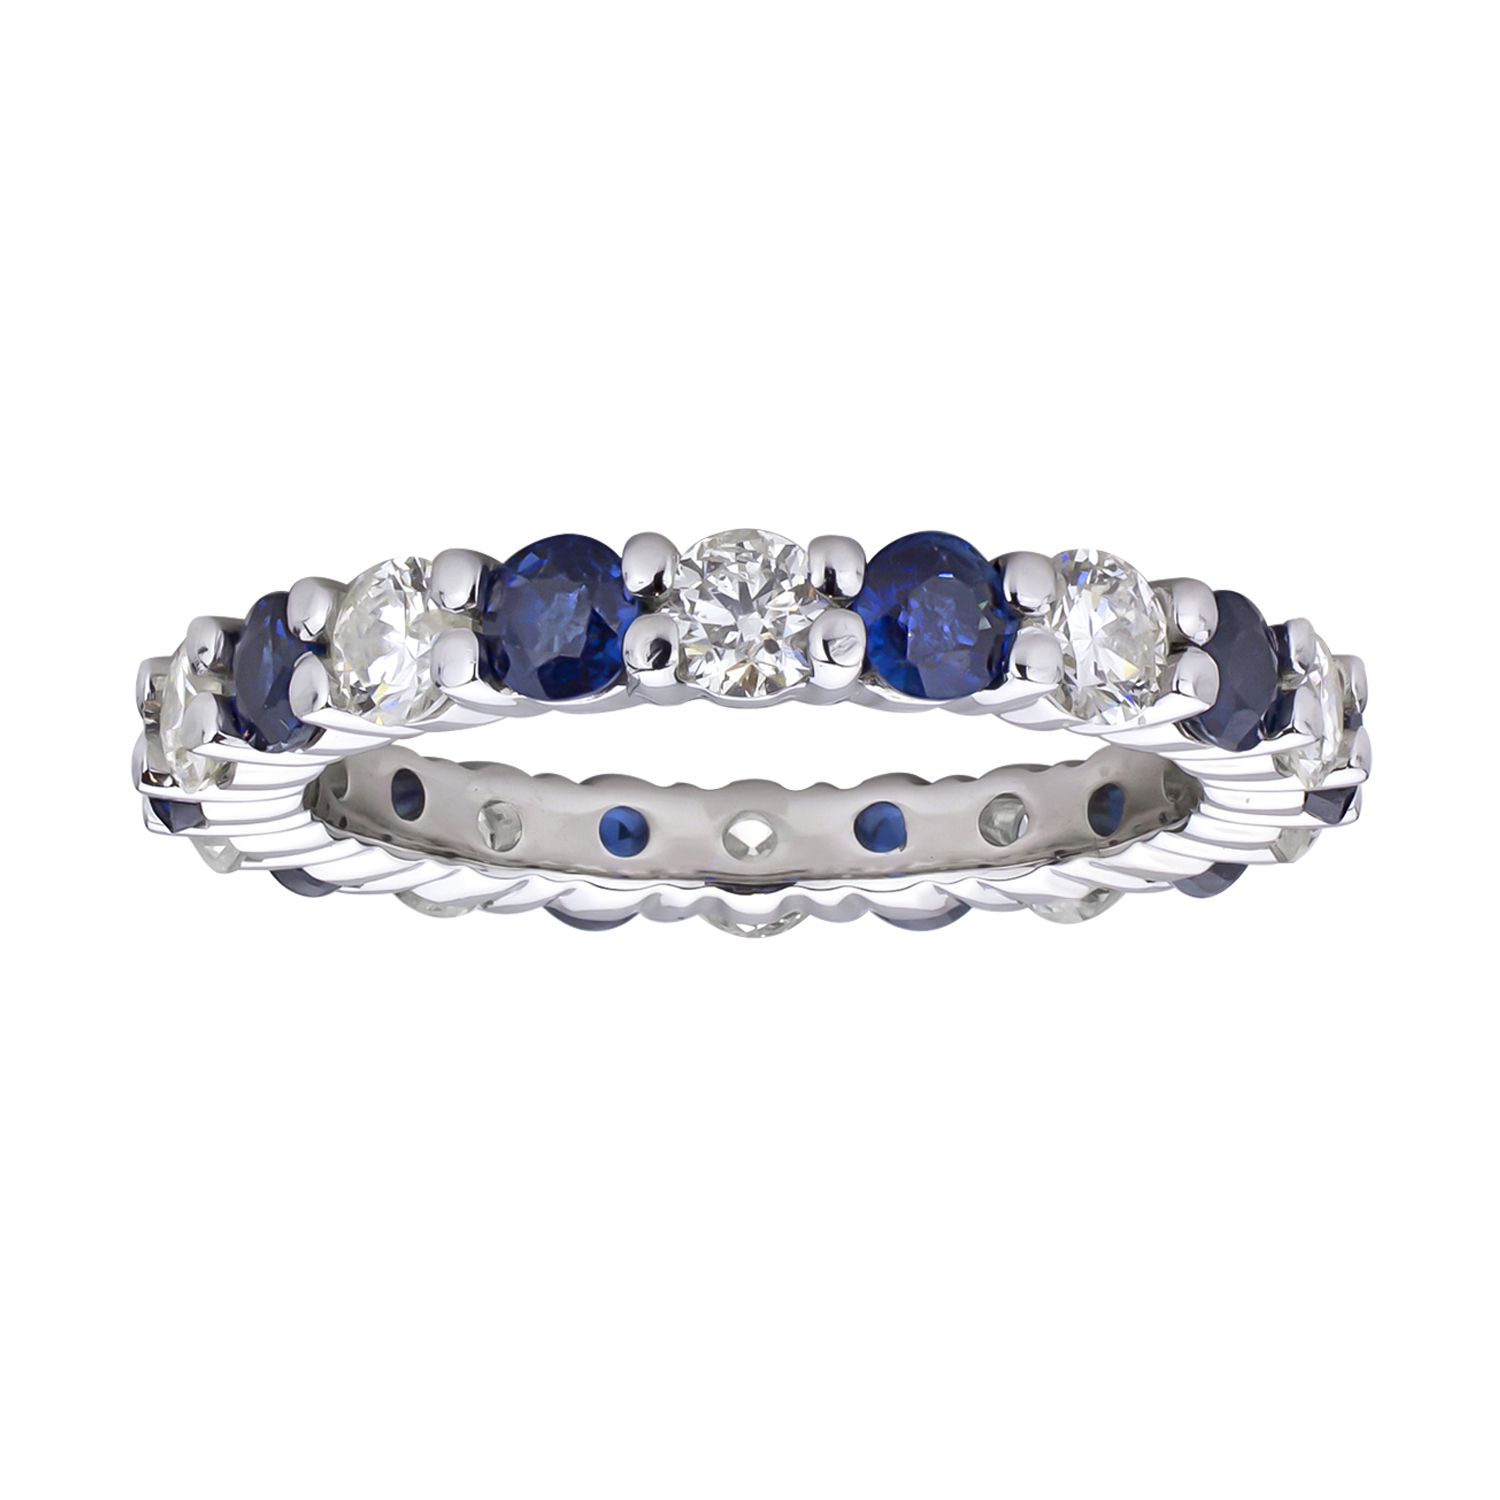 View 2.20cttw Diamond and Sapphire Eternity Band set in 14k Gold